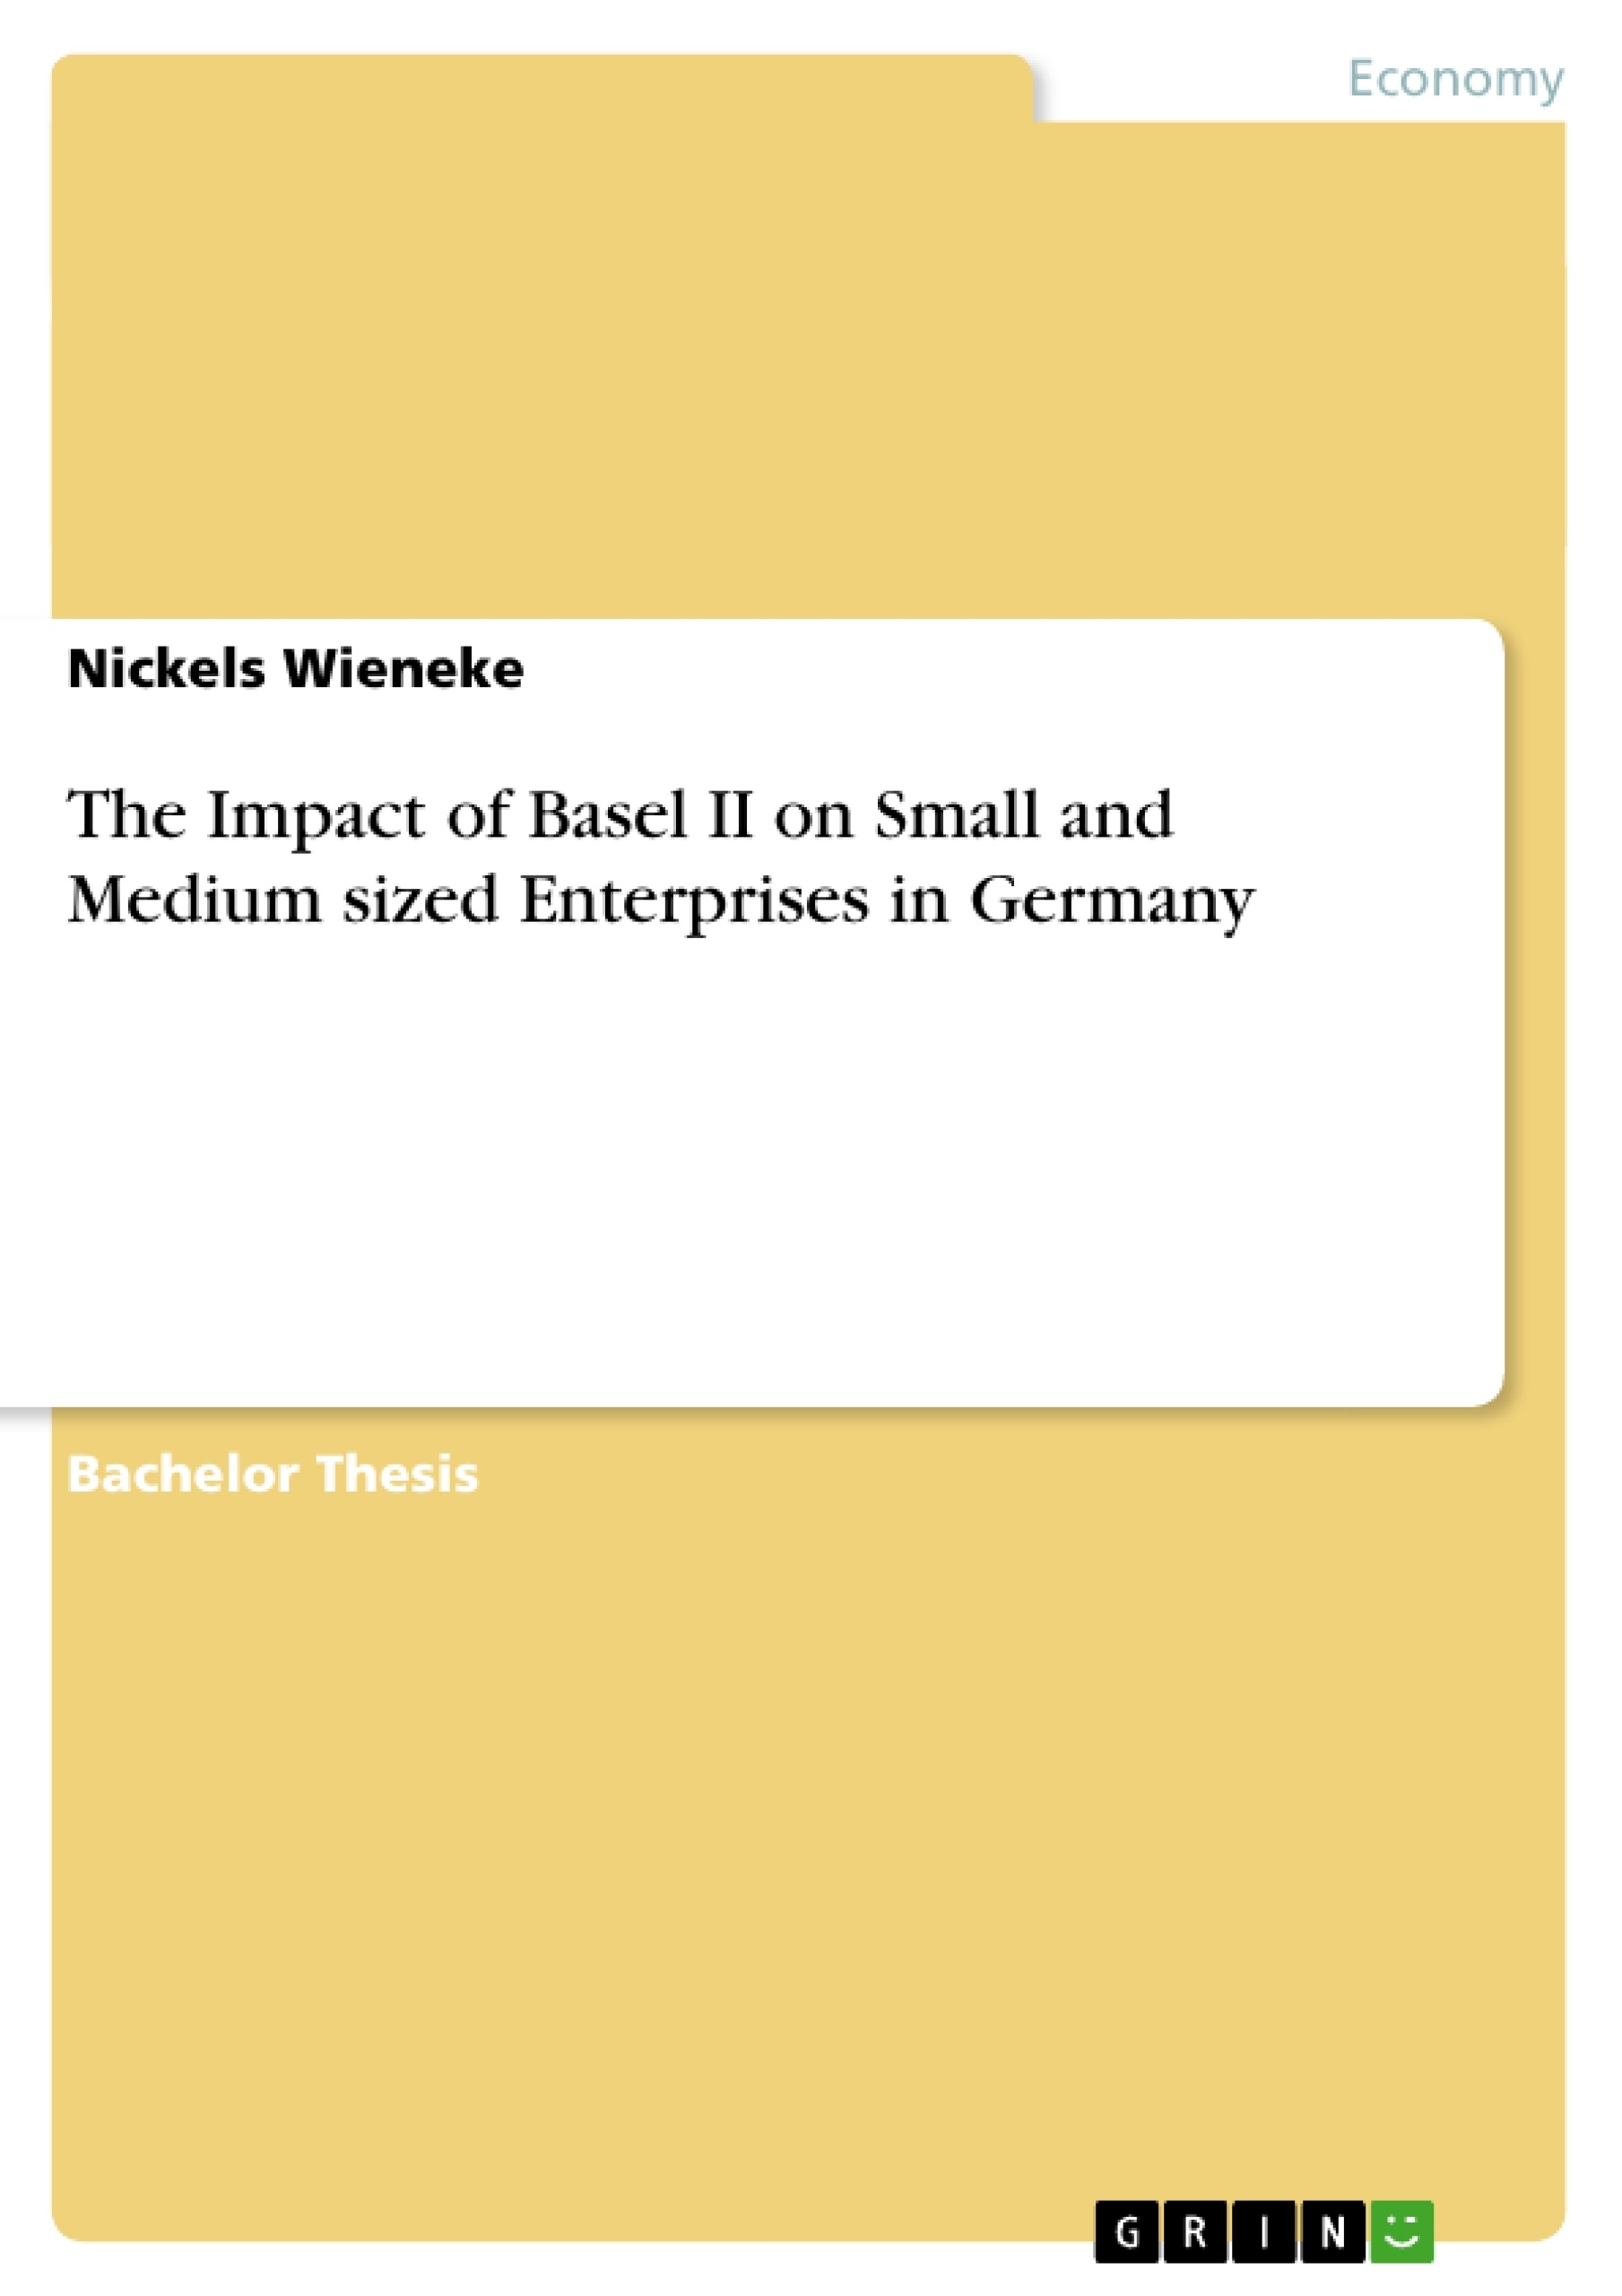 Title: The Impact of Basel II on Small and Medium sized Enterprises in Germany